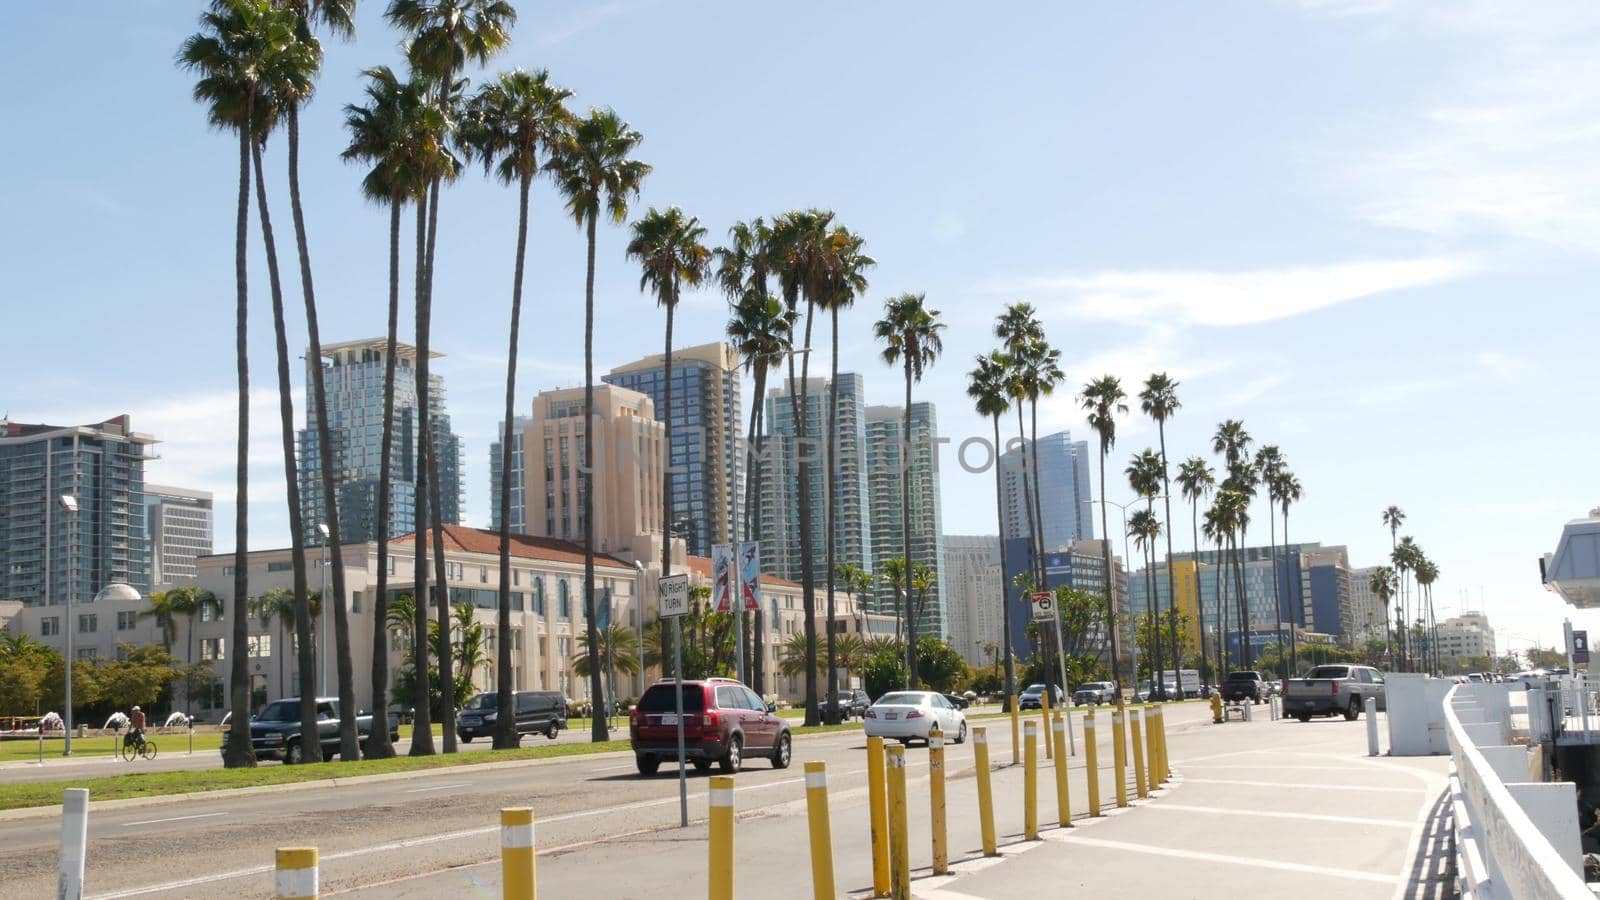 SAN DIEGO, CALIFORNIA USA - 30 JAN 2020: County civic center in downtown. Urban skyline of Gaslamp Quarter. Cityscape of metropolis, pacific harbour waterfront with palm trees. Cars drive on road by DogoraSun